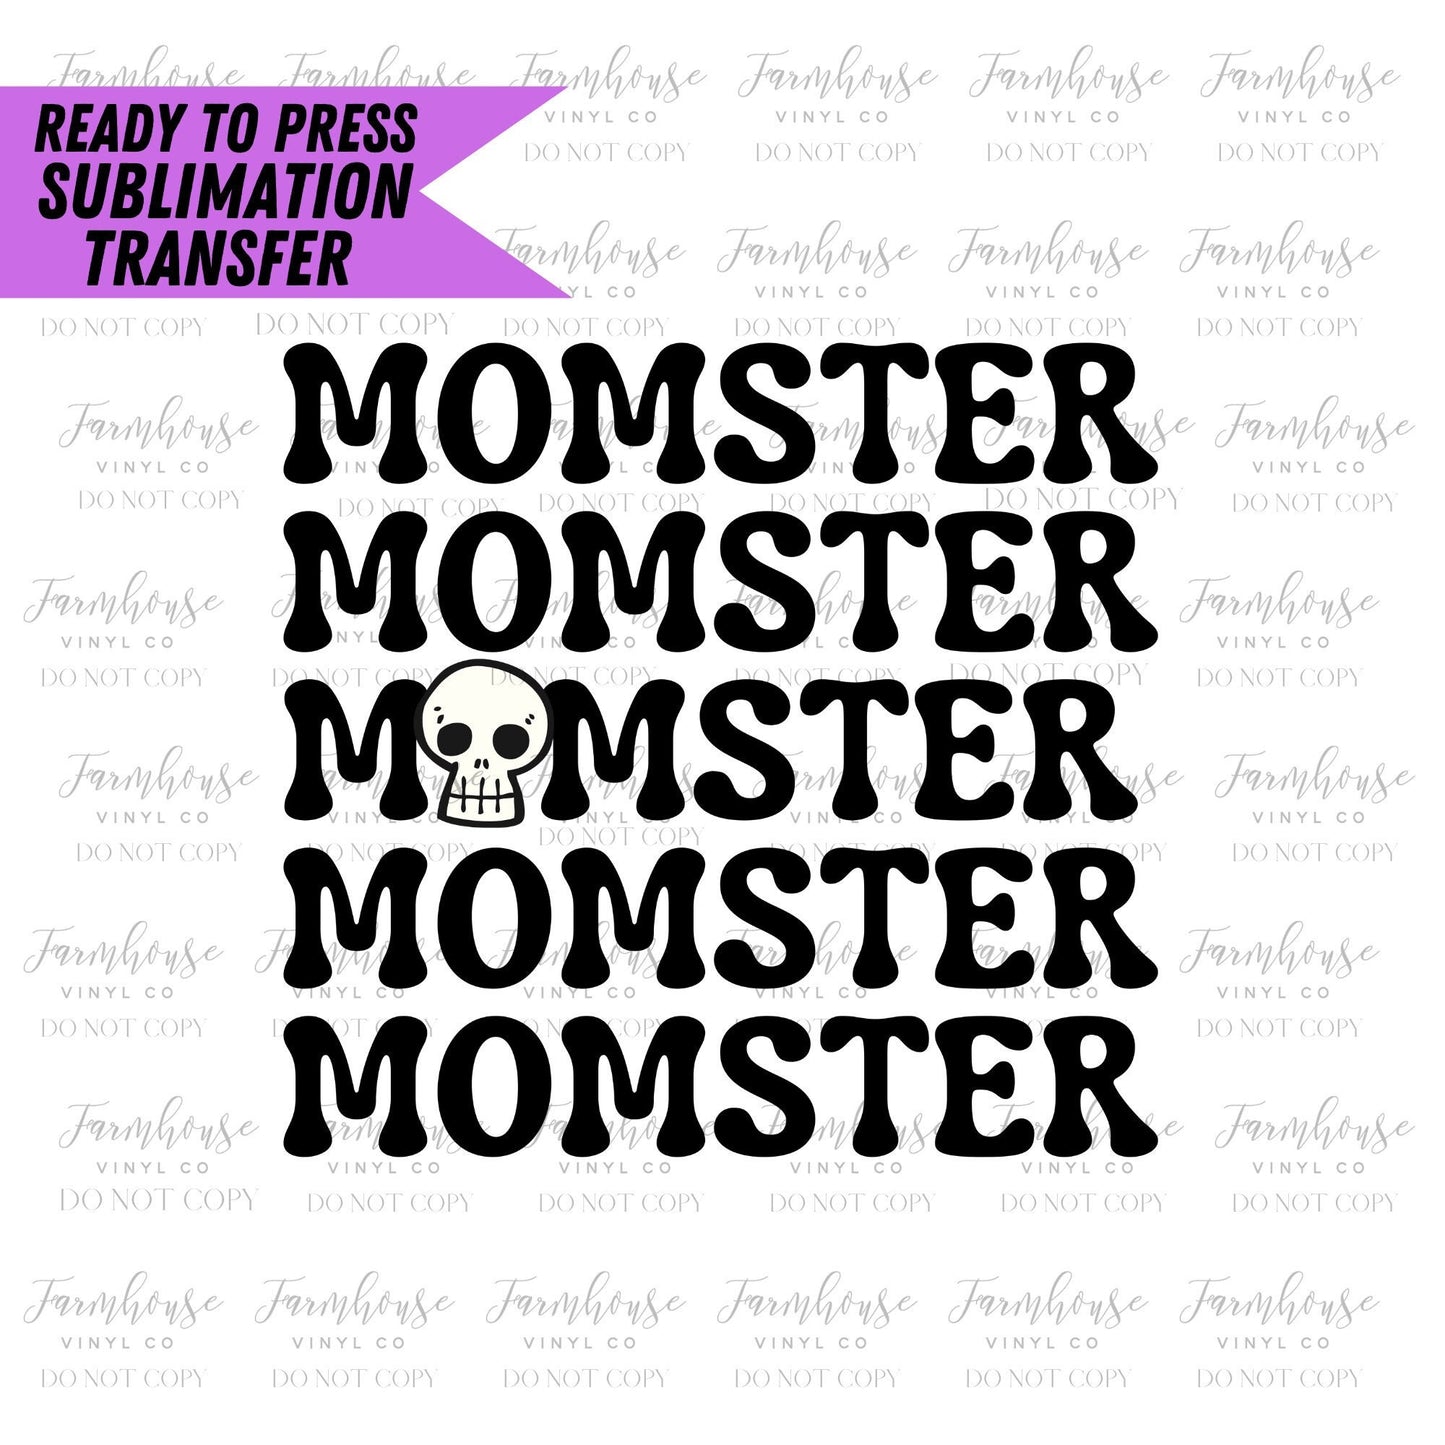 Momster Skull, Ready to Press Sublimation Transfer, Fall Halloween Trending Graphic 22, Sublimation Prints, Women's Halloween Mom Costume - Farmhouse Vinyl Co